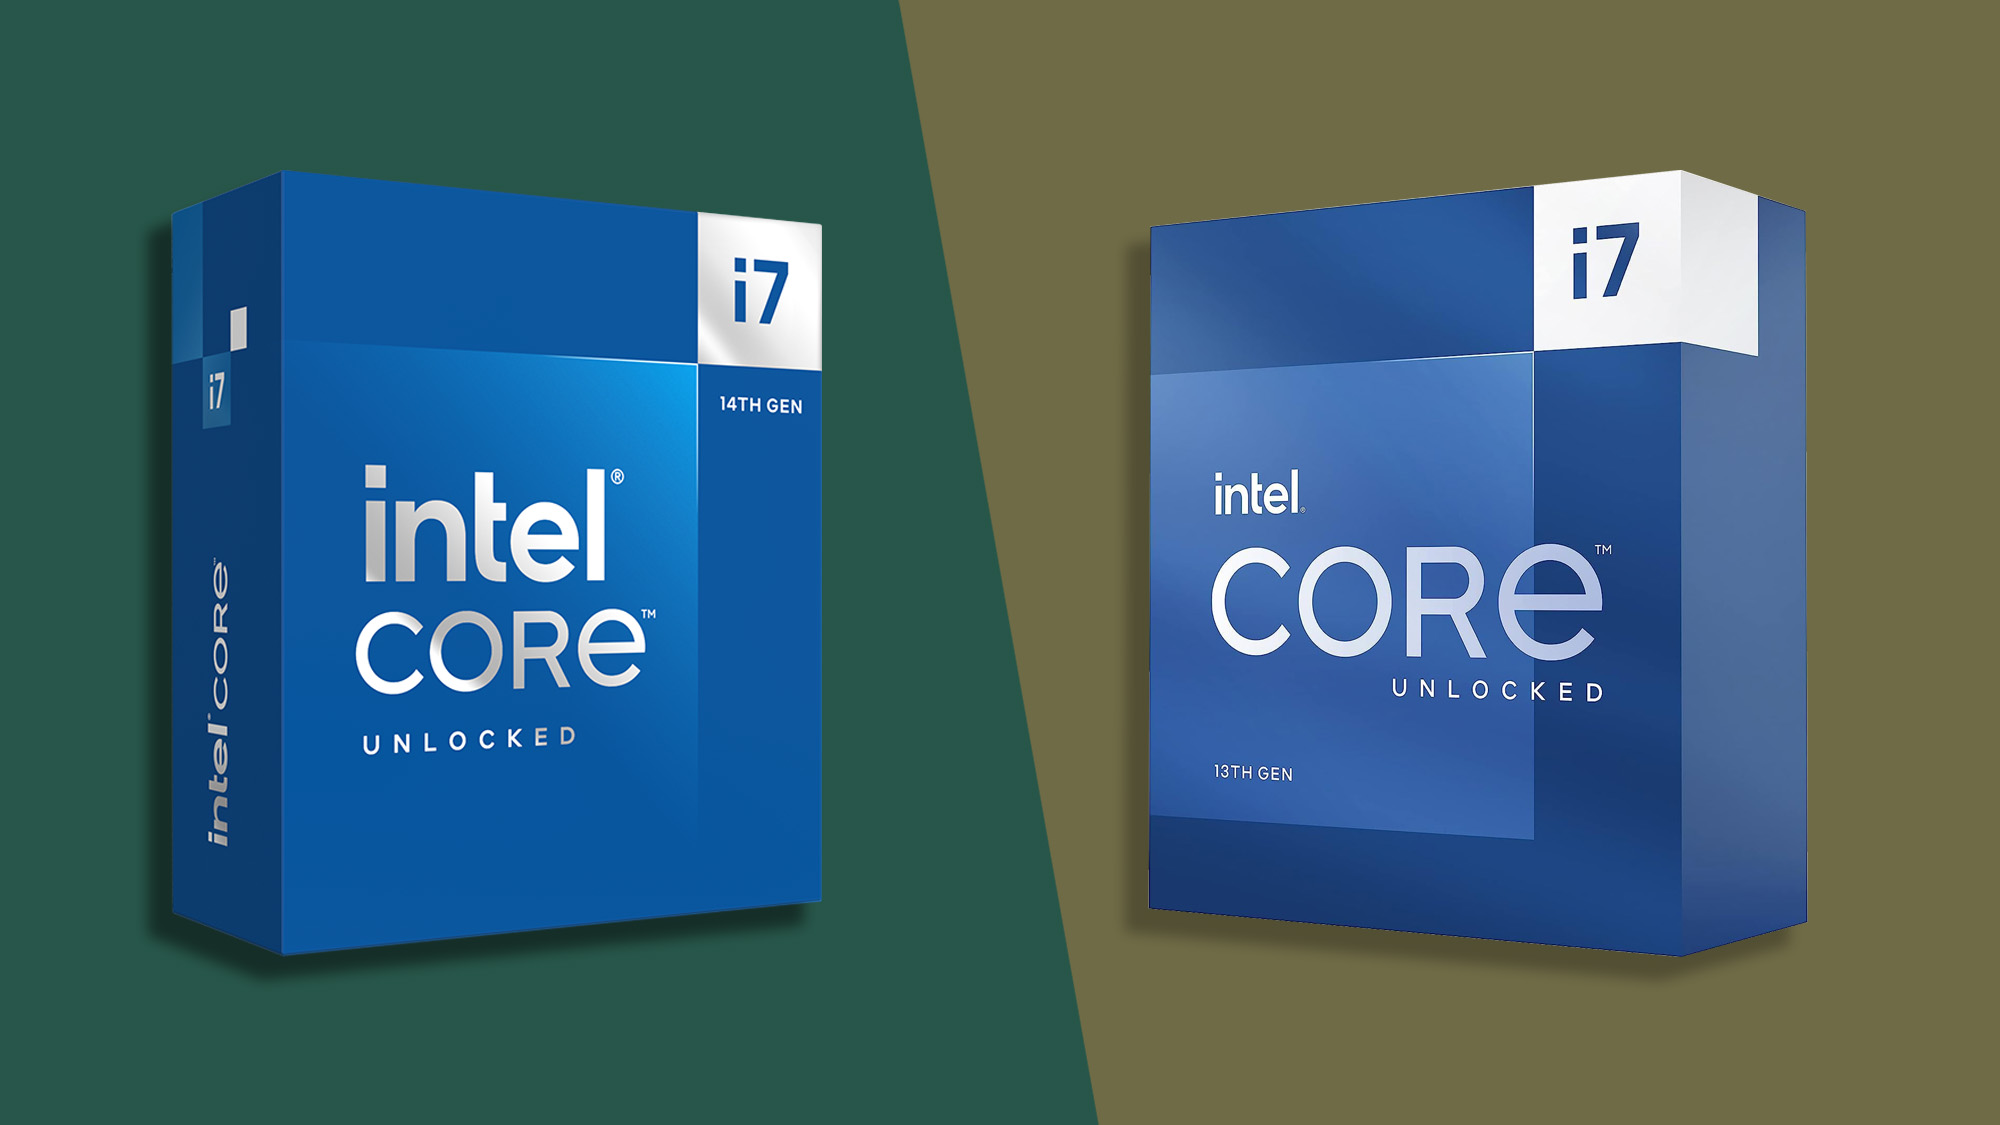 Intel Core i7-14700K ES CPU Is Up To 17% Faster Than 13700K In